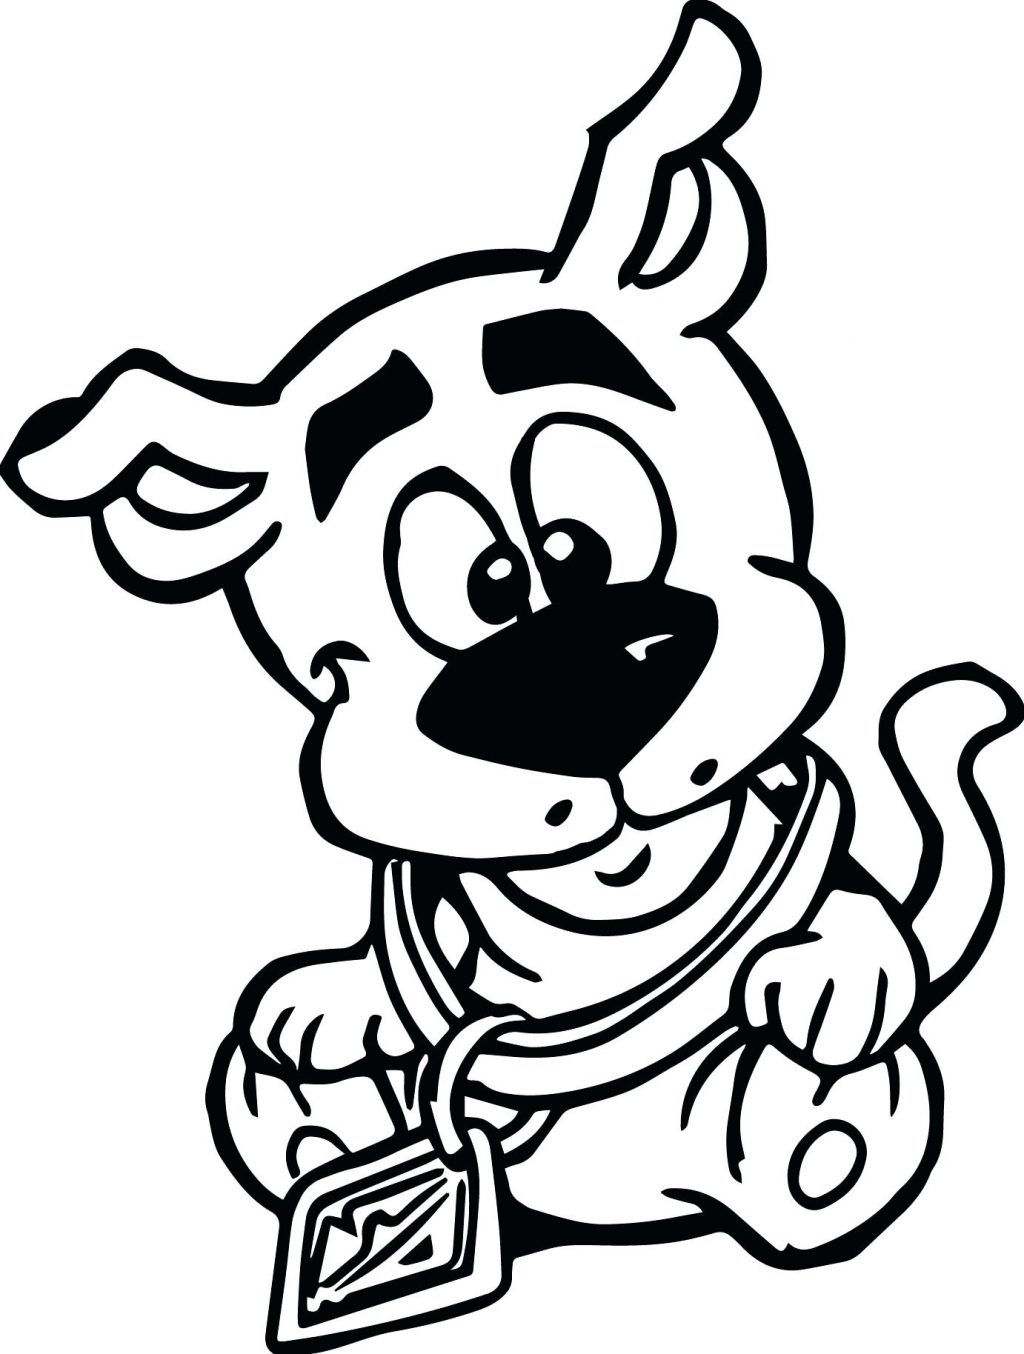 Coloring Pages ~ Scooby Doo Colouring Pictures To Print Coloring - Free Printable Coloring Pages Scooby Doo